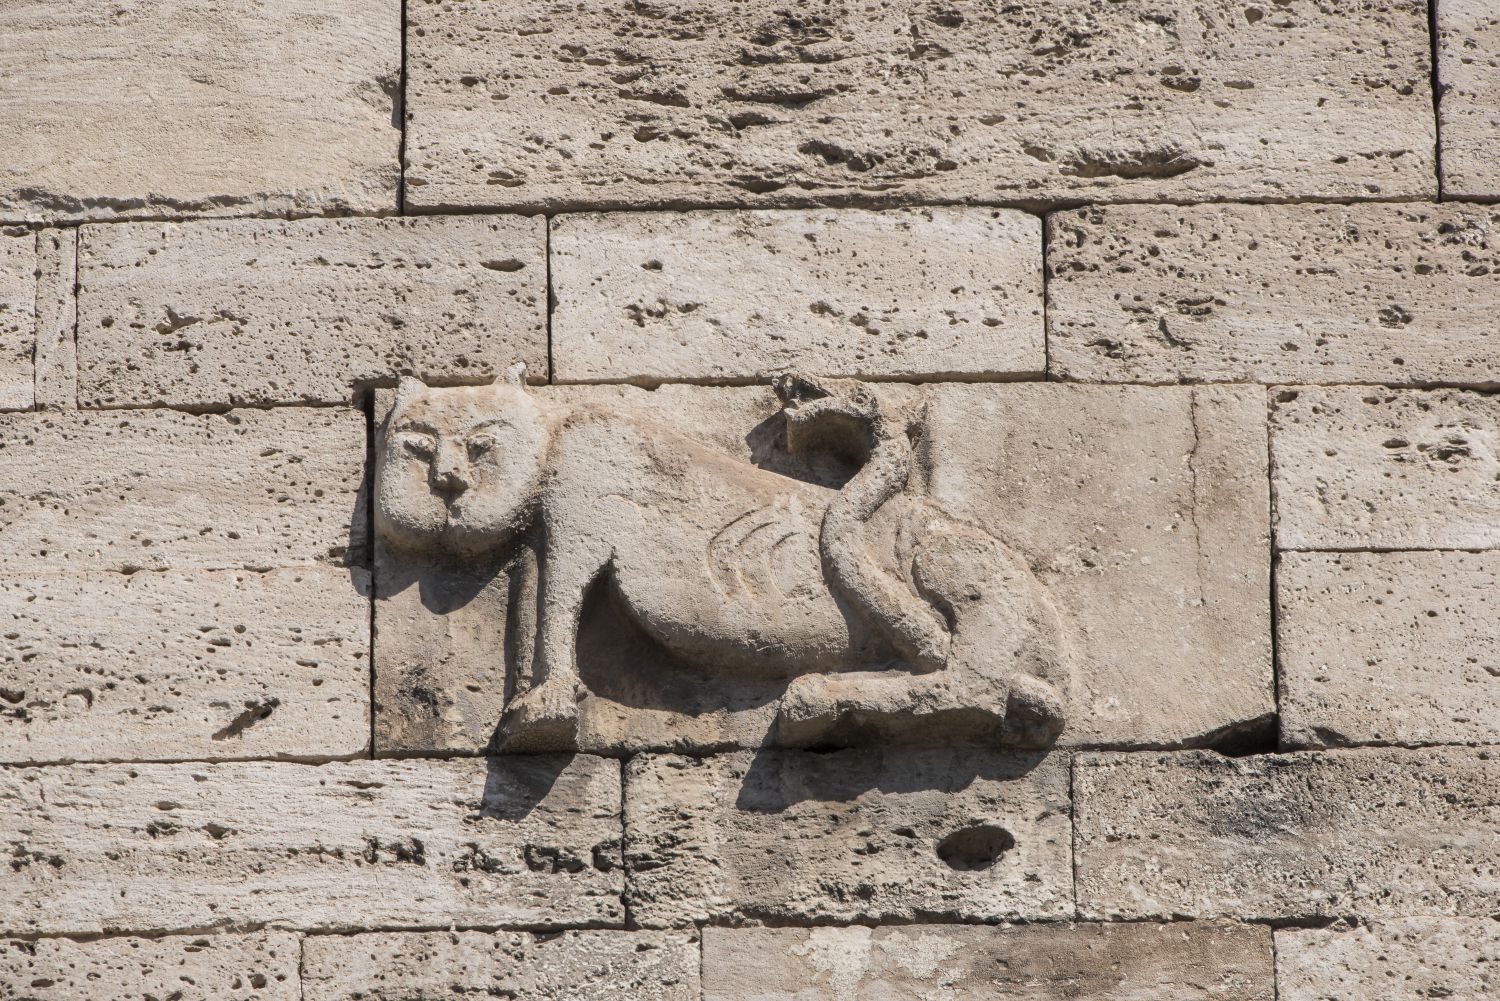 View of lion bas relief on exterior of building.